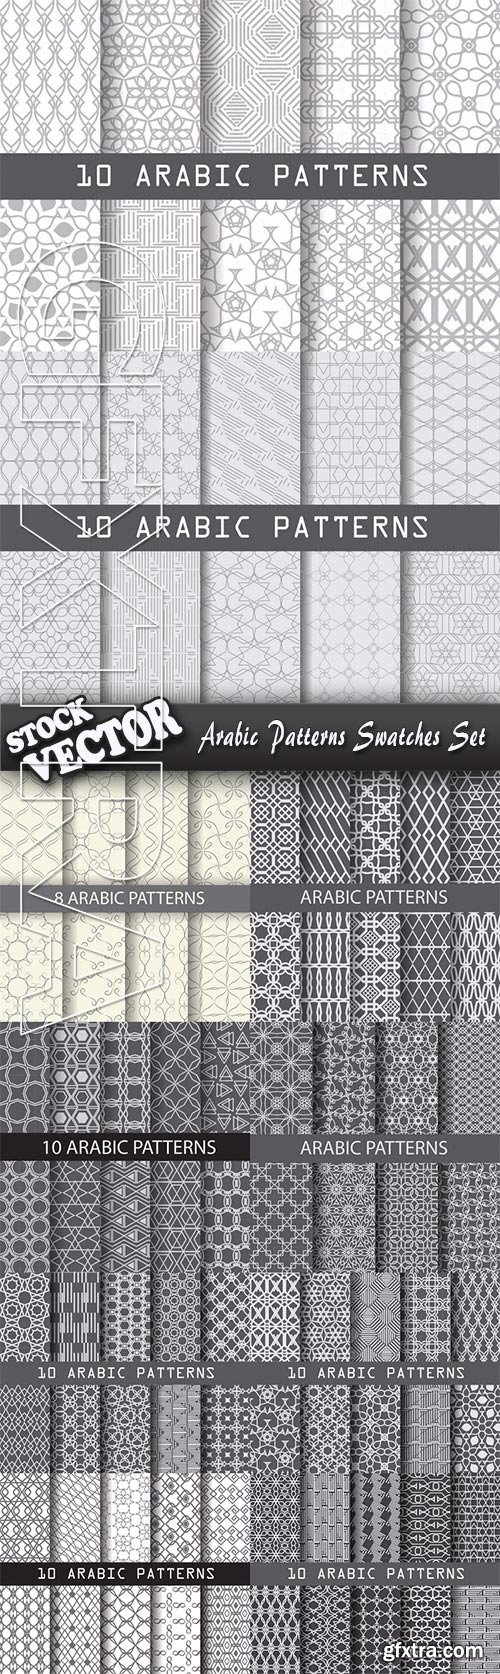 Stock Vector - Arabic Patterns Swatches Set